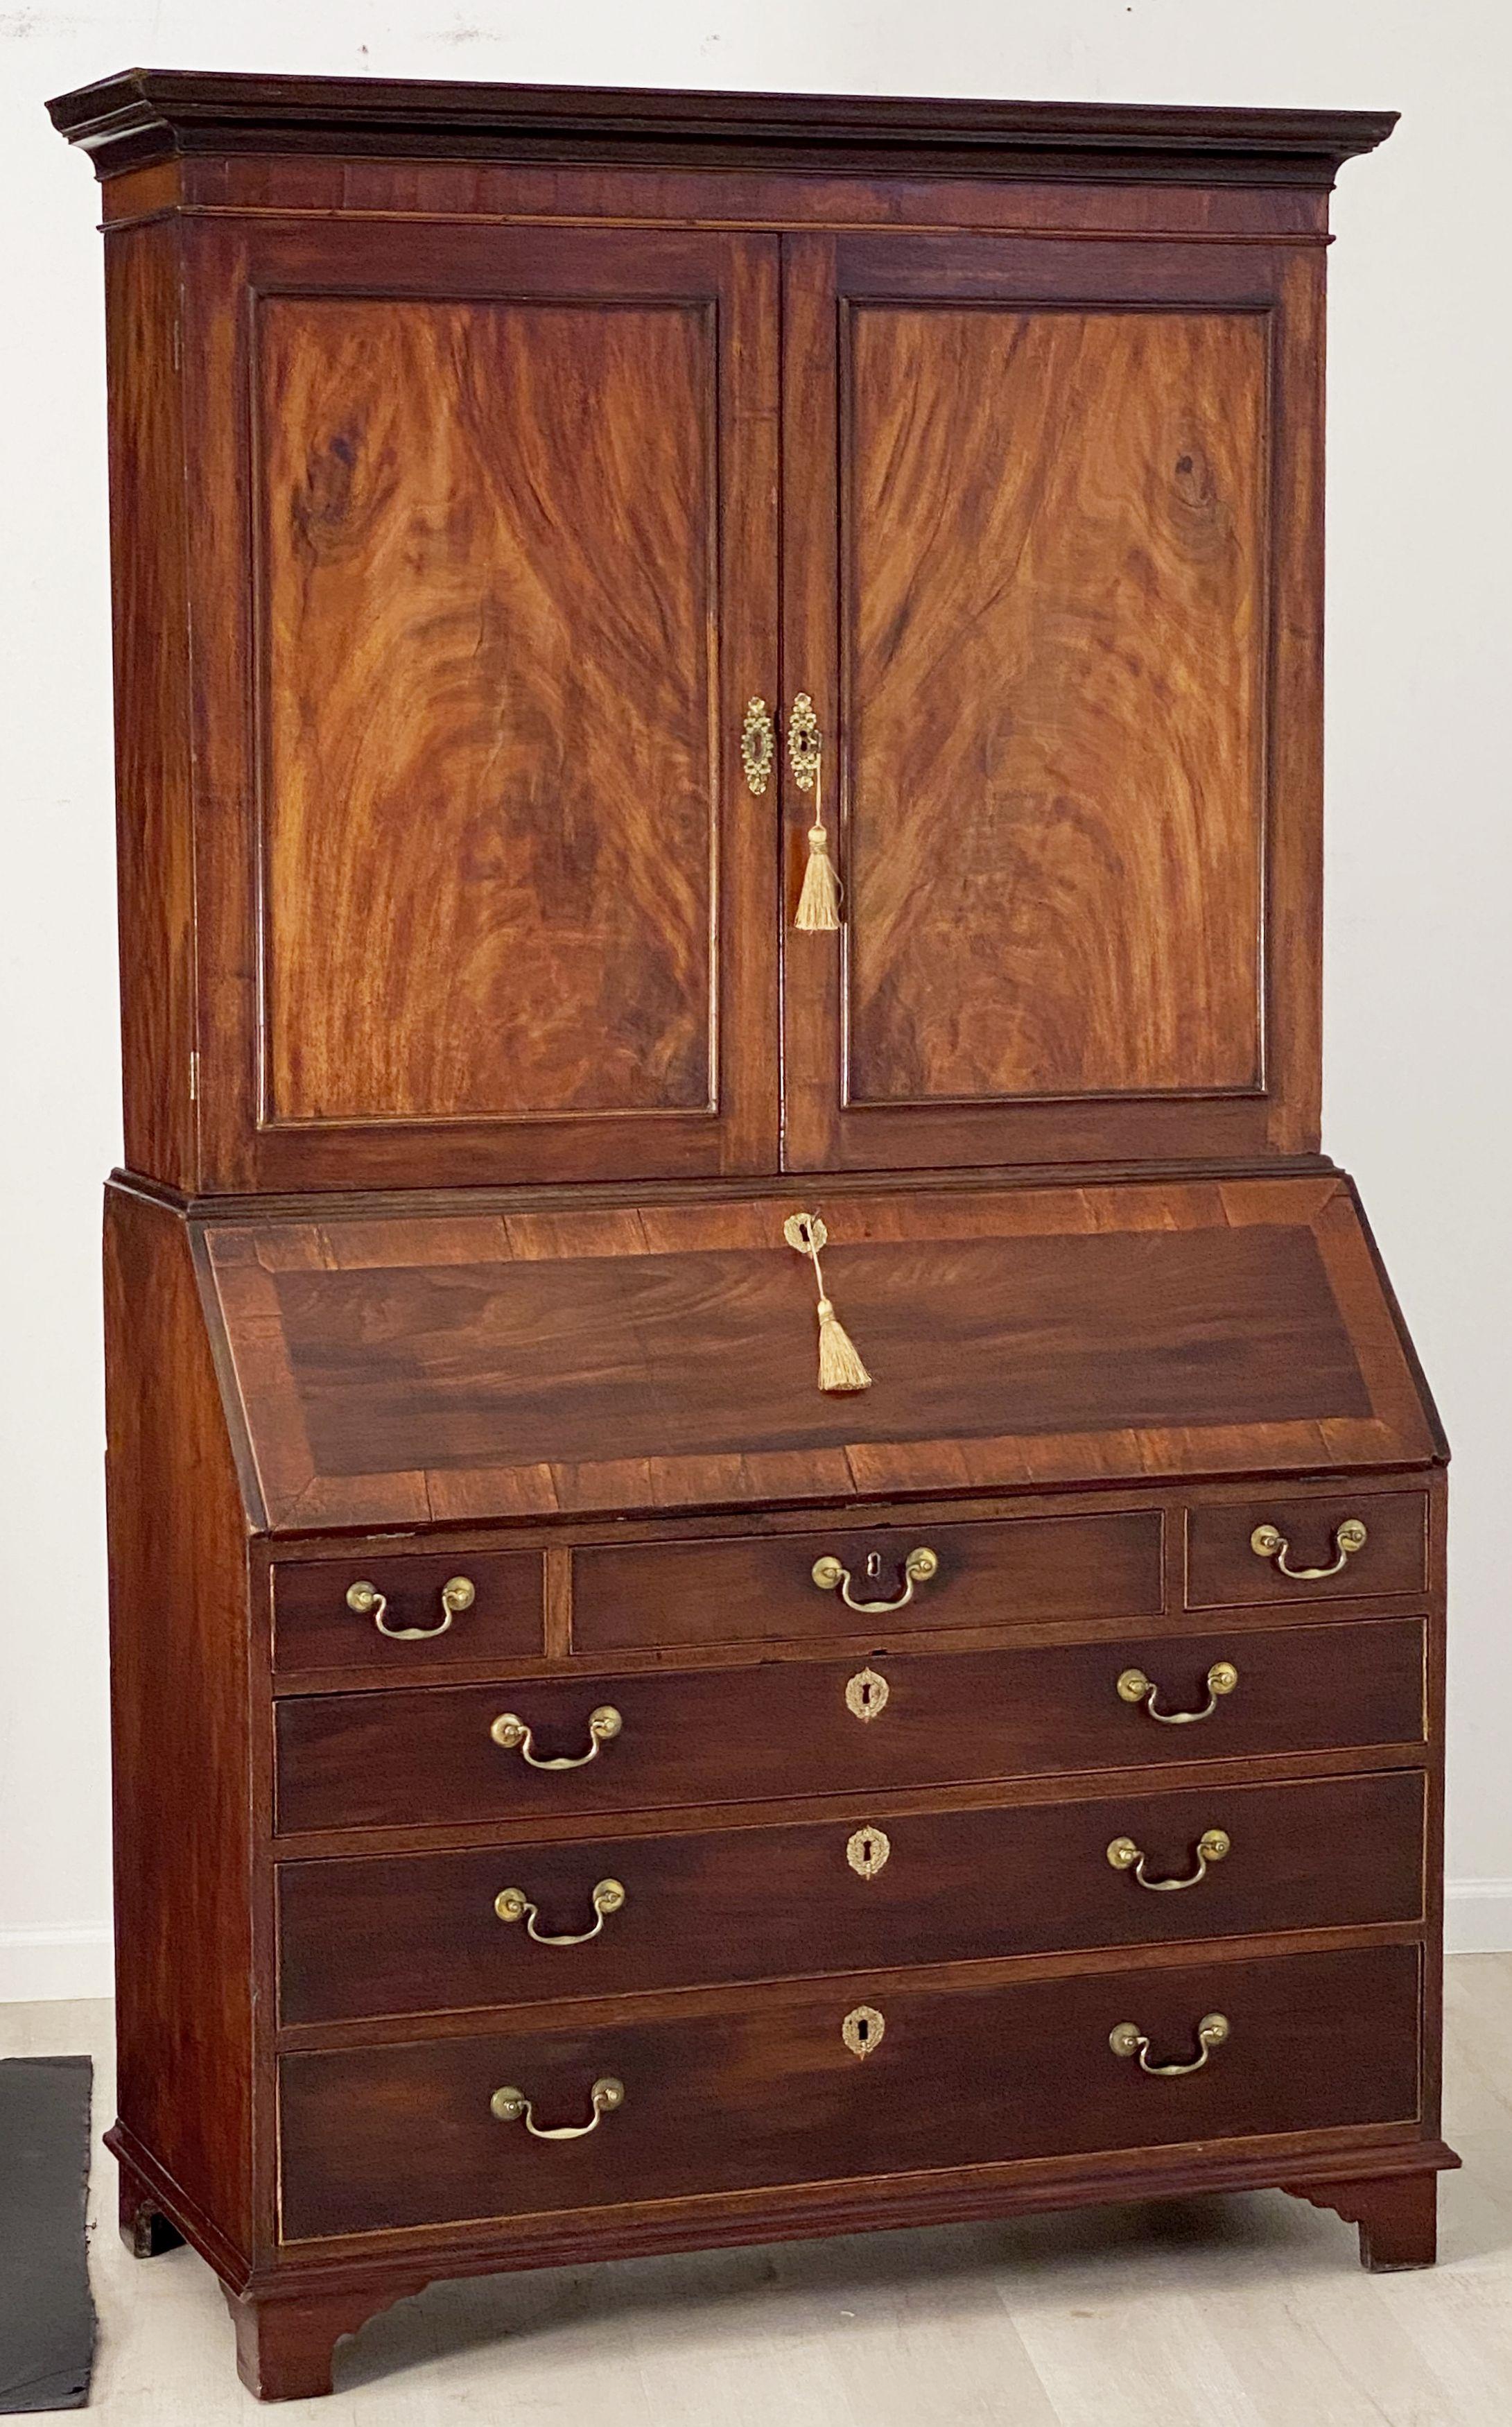 A handsome English bureau bookcase or secretary from the George III period, featuring a canopy top over two paneled doors of flame-cut mahogany, opening to a a bookcase with fitted shelves, set upon a slant top bureau desk base, the fall opening to